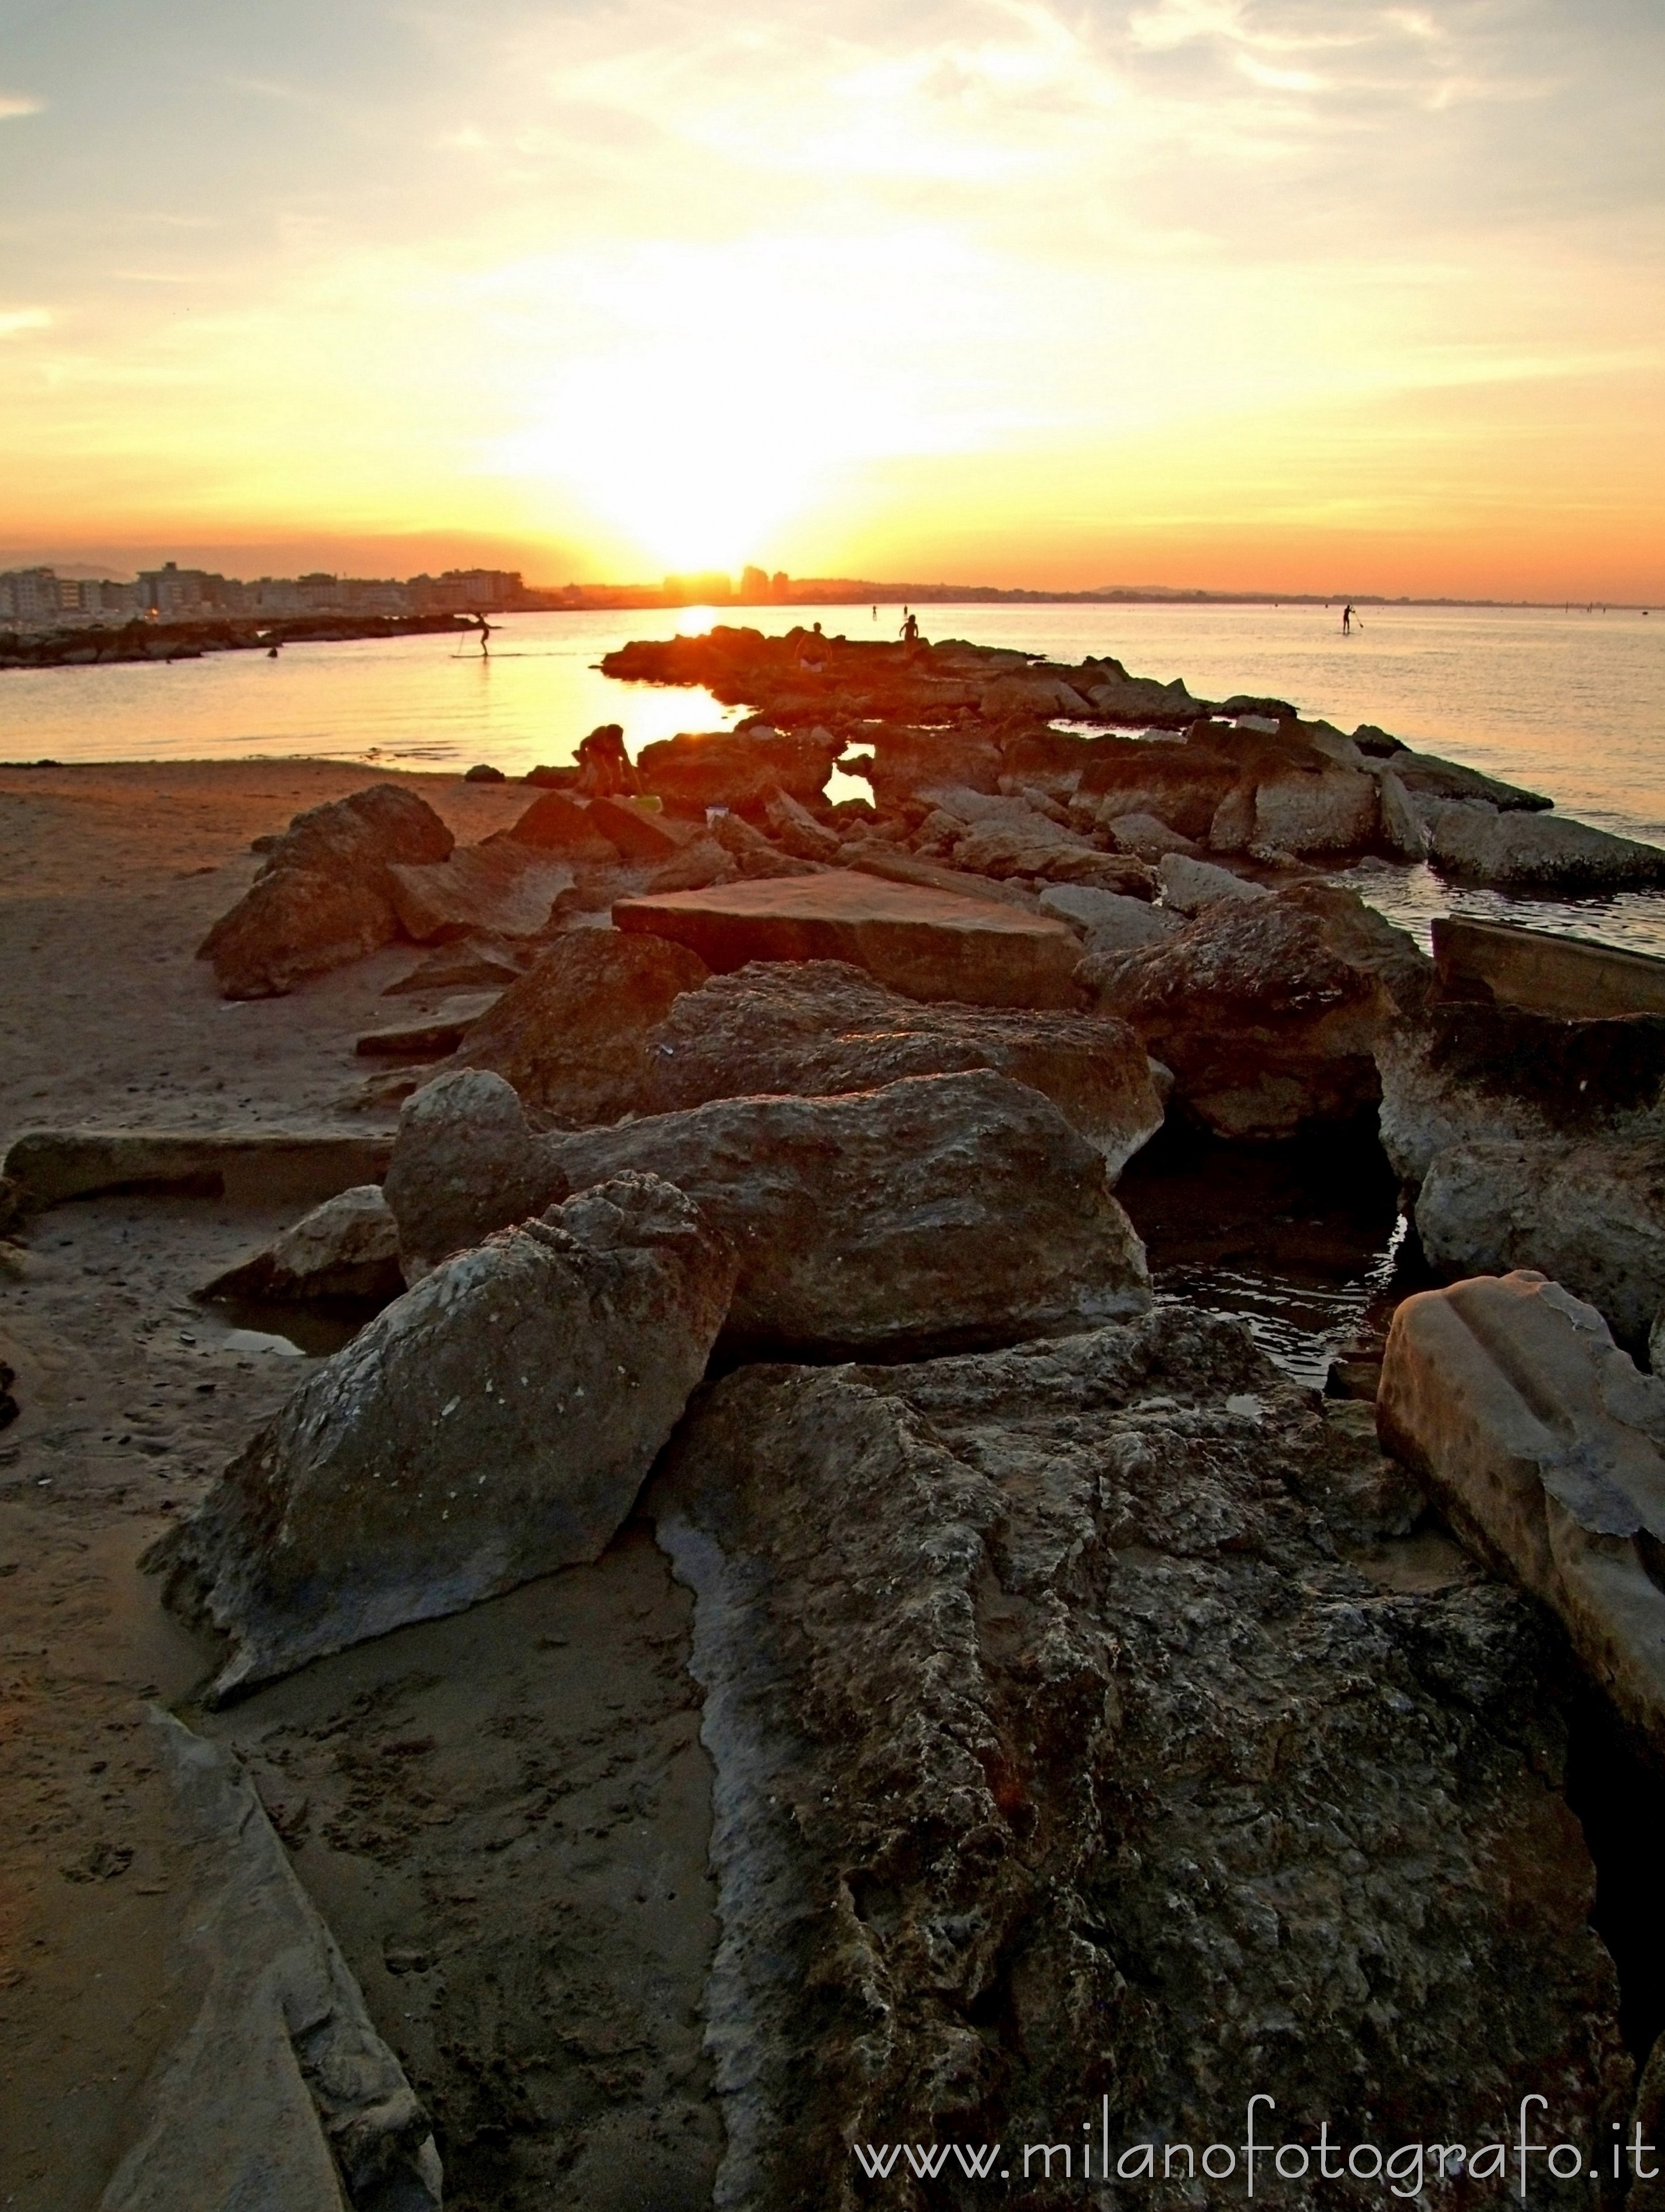 Cattolica (Rimini, Italy): Sunset with protective stoneborder - Cattolica (Rimini, Italy)